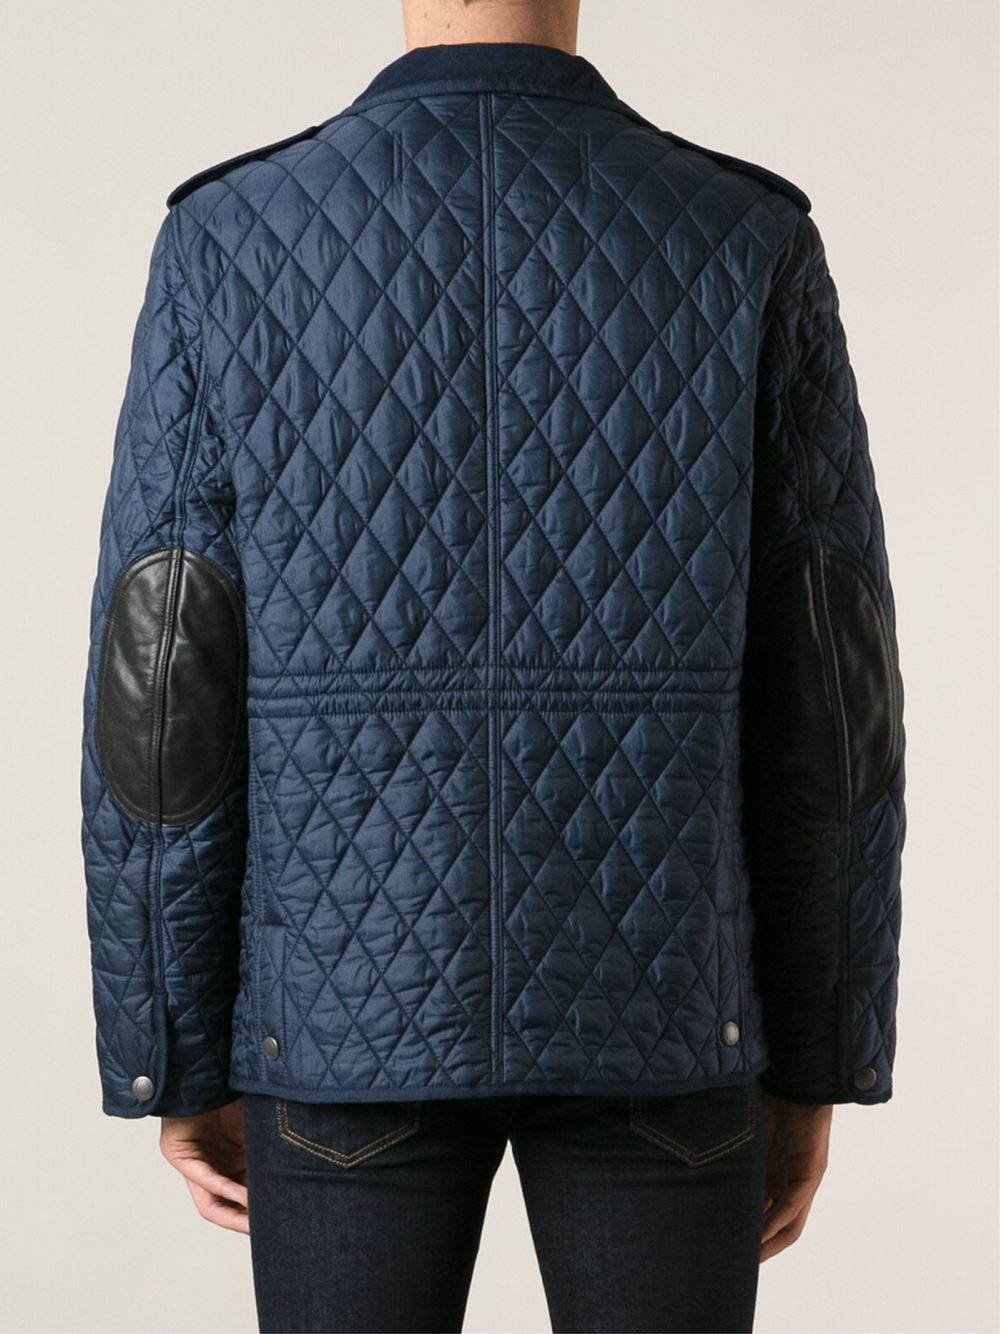 Lyst - Burberry Brit Diamond Quilted Field Jacket in Blue for Men